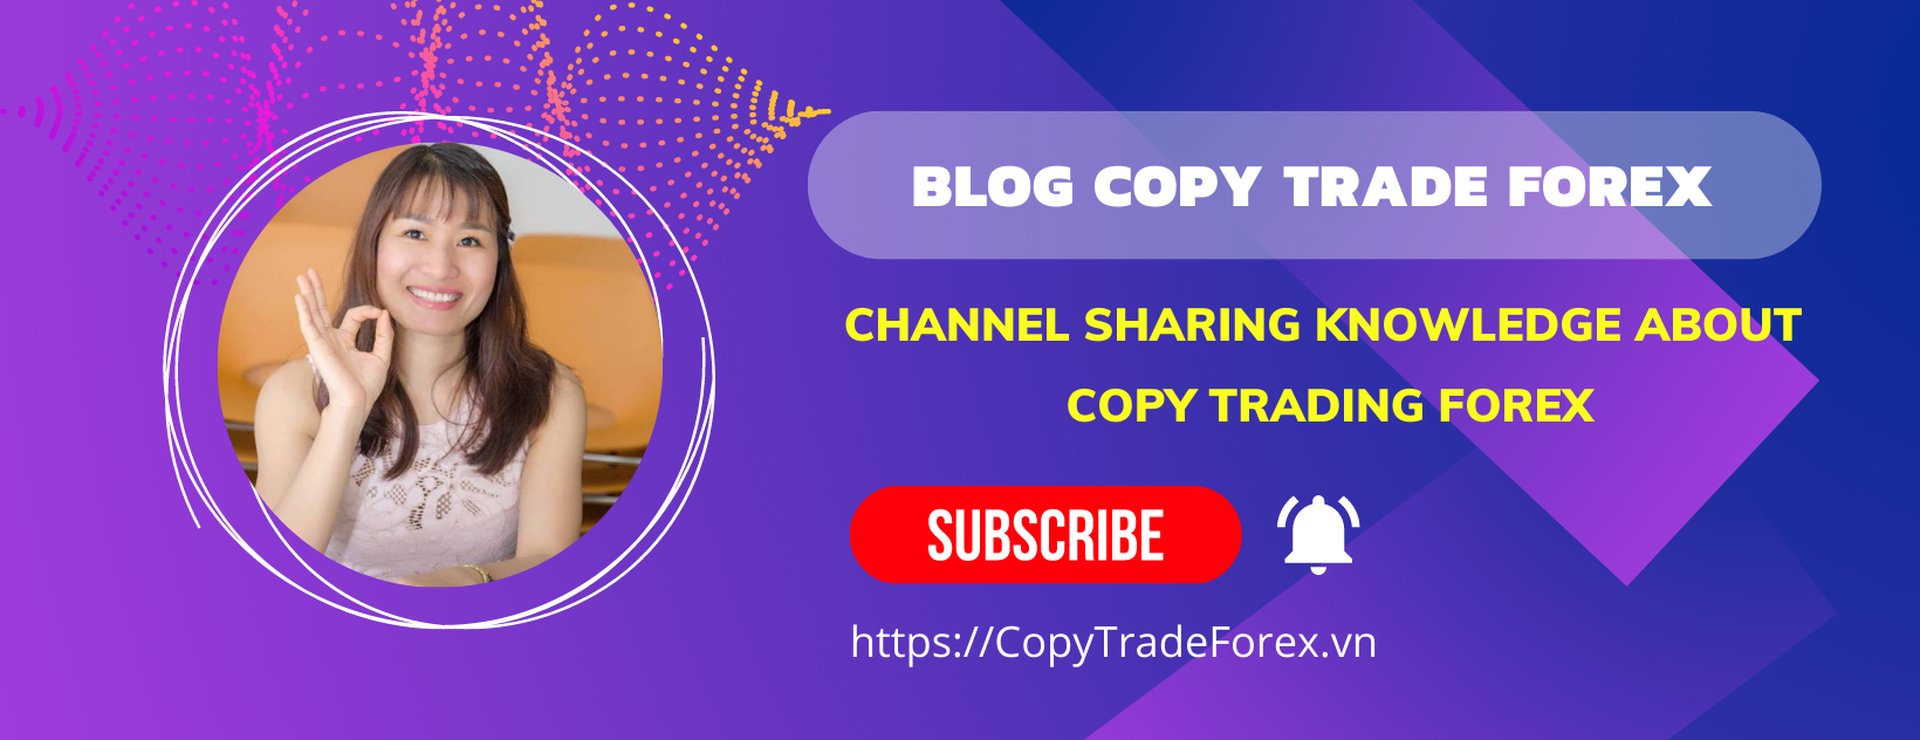 Simple and effective guide to Copytrade Forex.